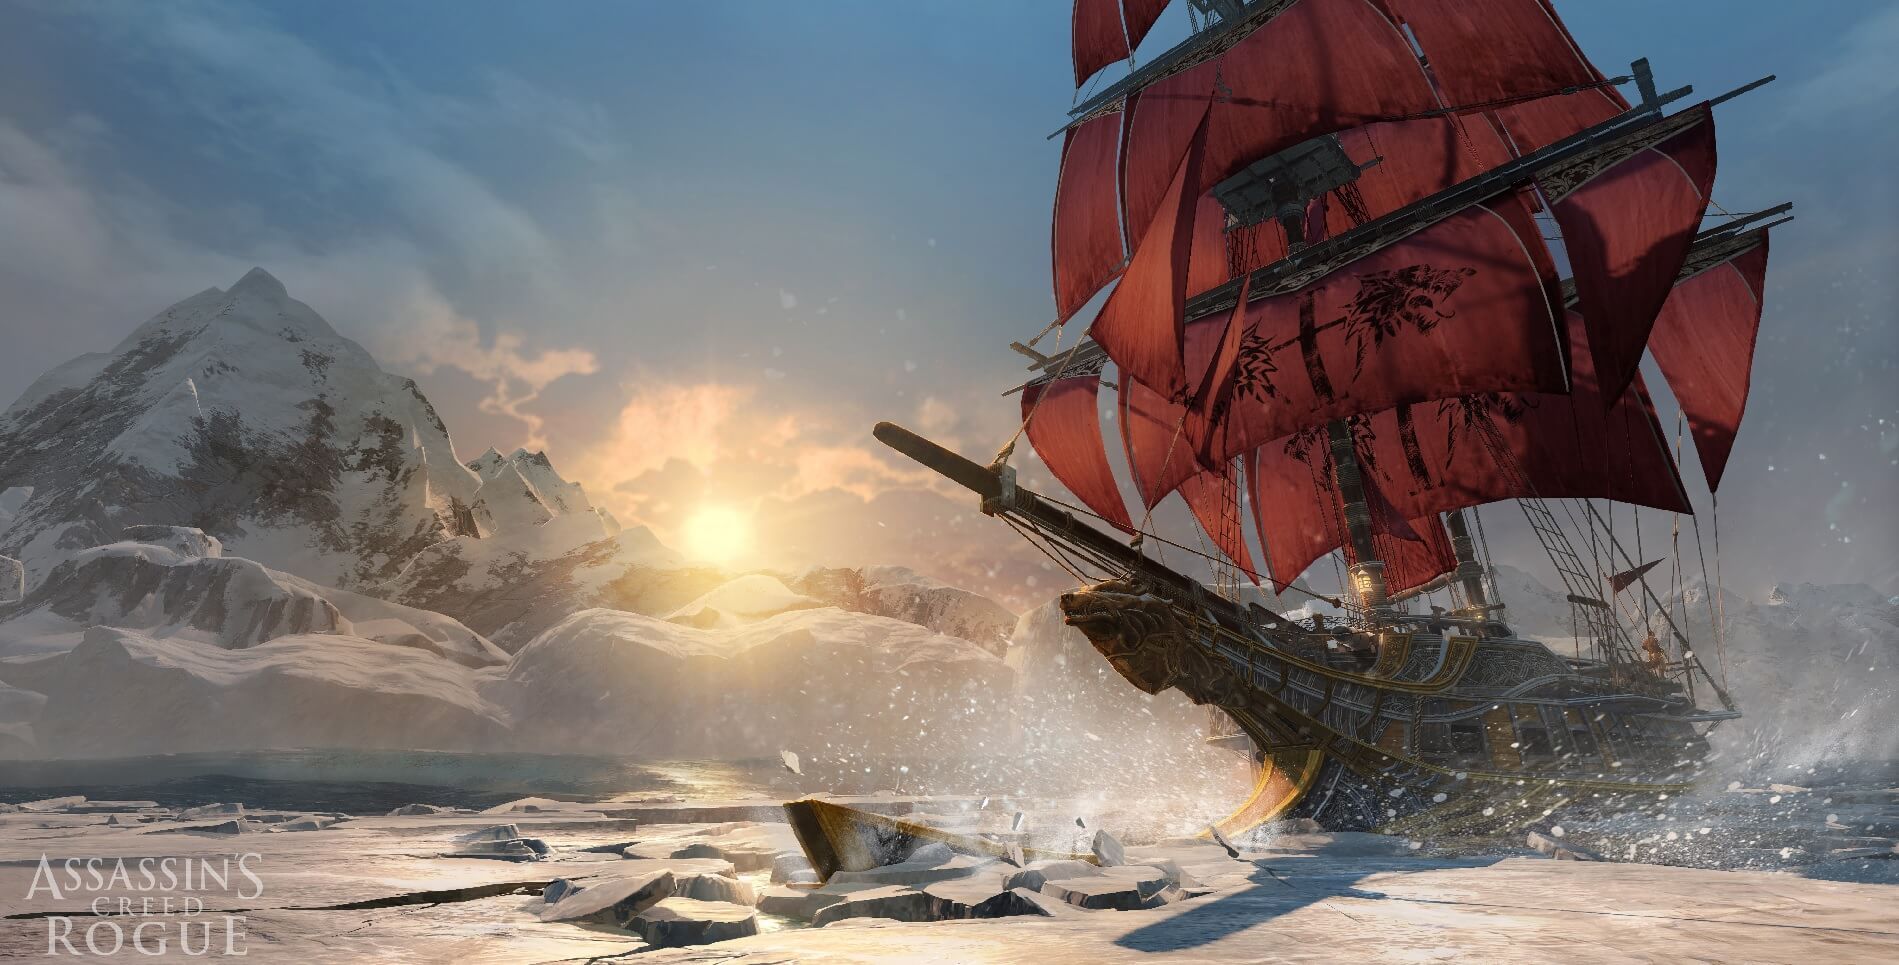 Assassins Creed Rogue ship breaking ice